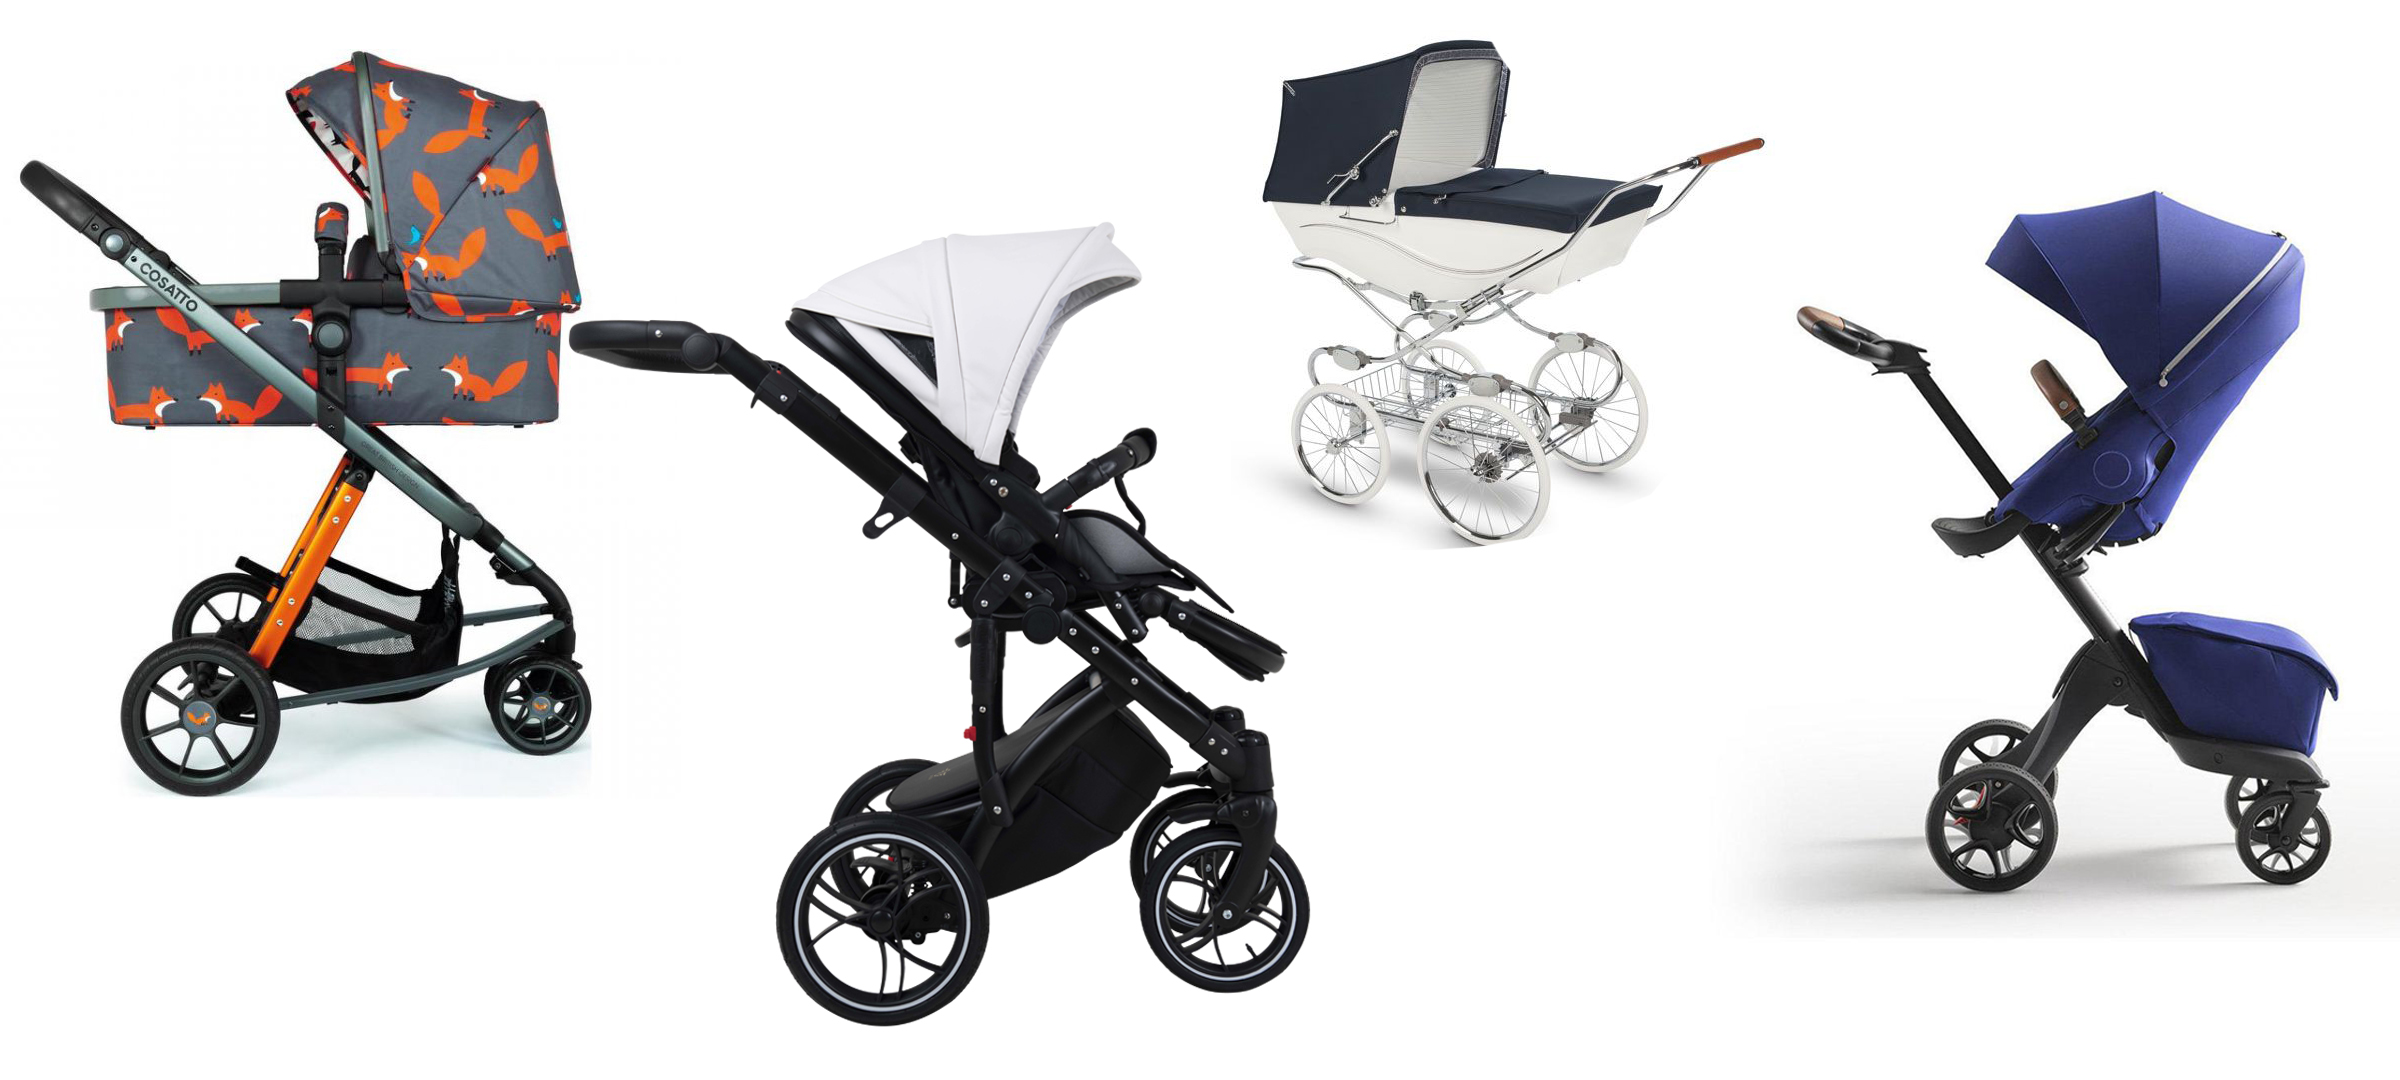 What’s the Difference Between a Pushchair and a Stroller?